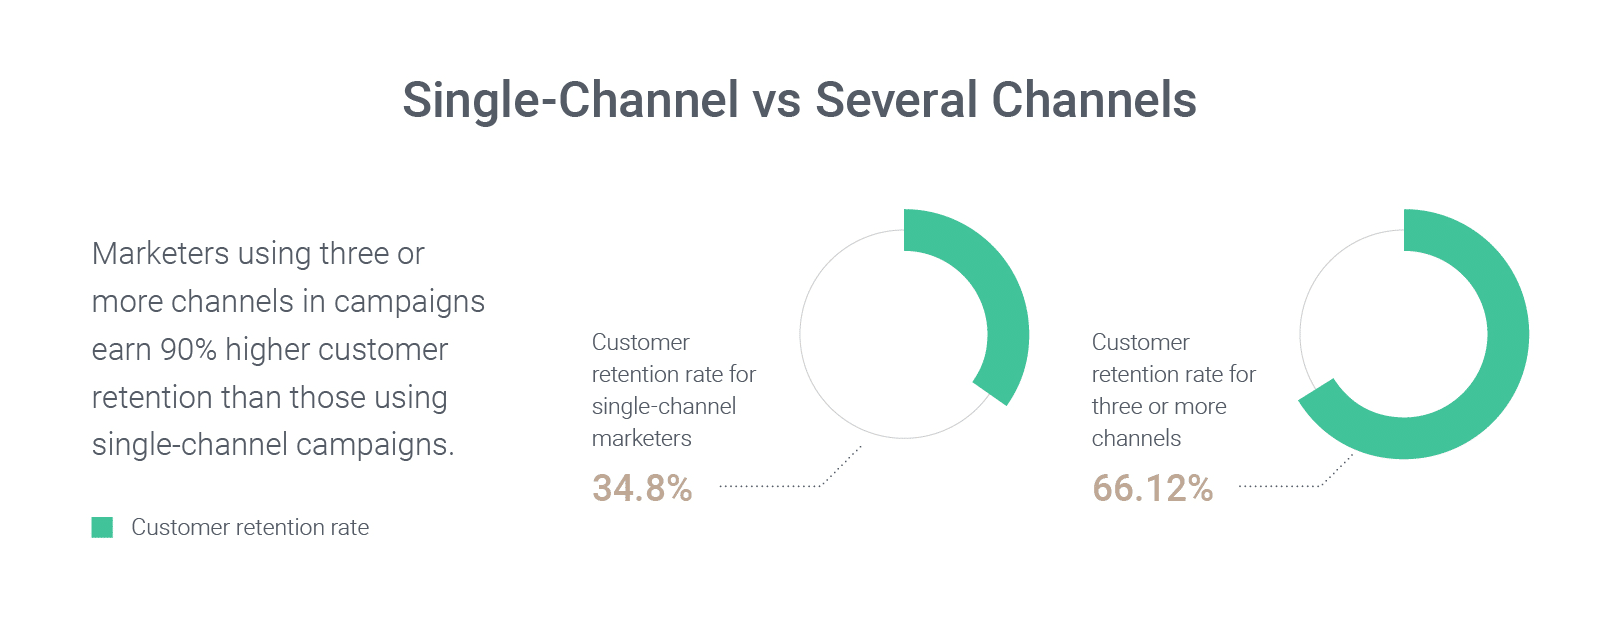 Build an Omnichannel Strategy For eCommerce Stores because omnichannel strategies work better than single channnel, according to this graph